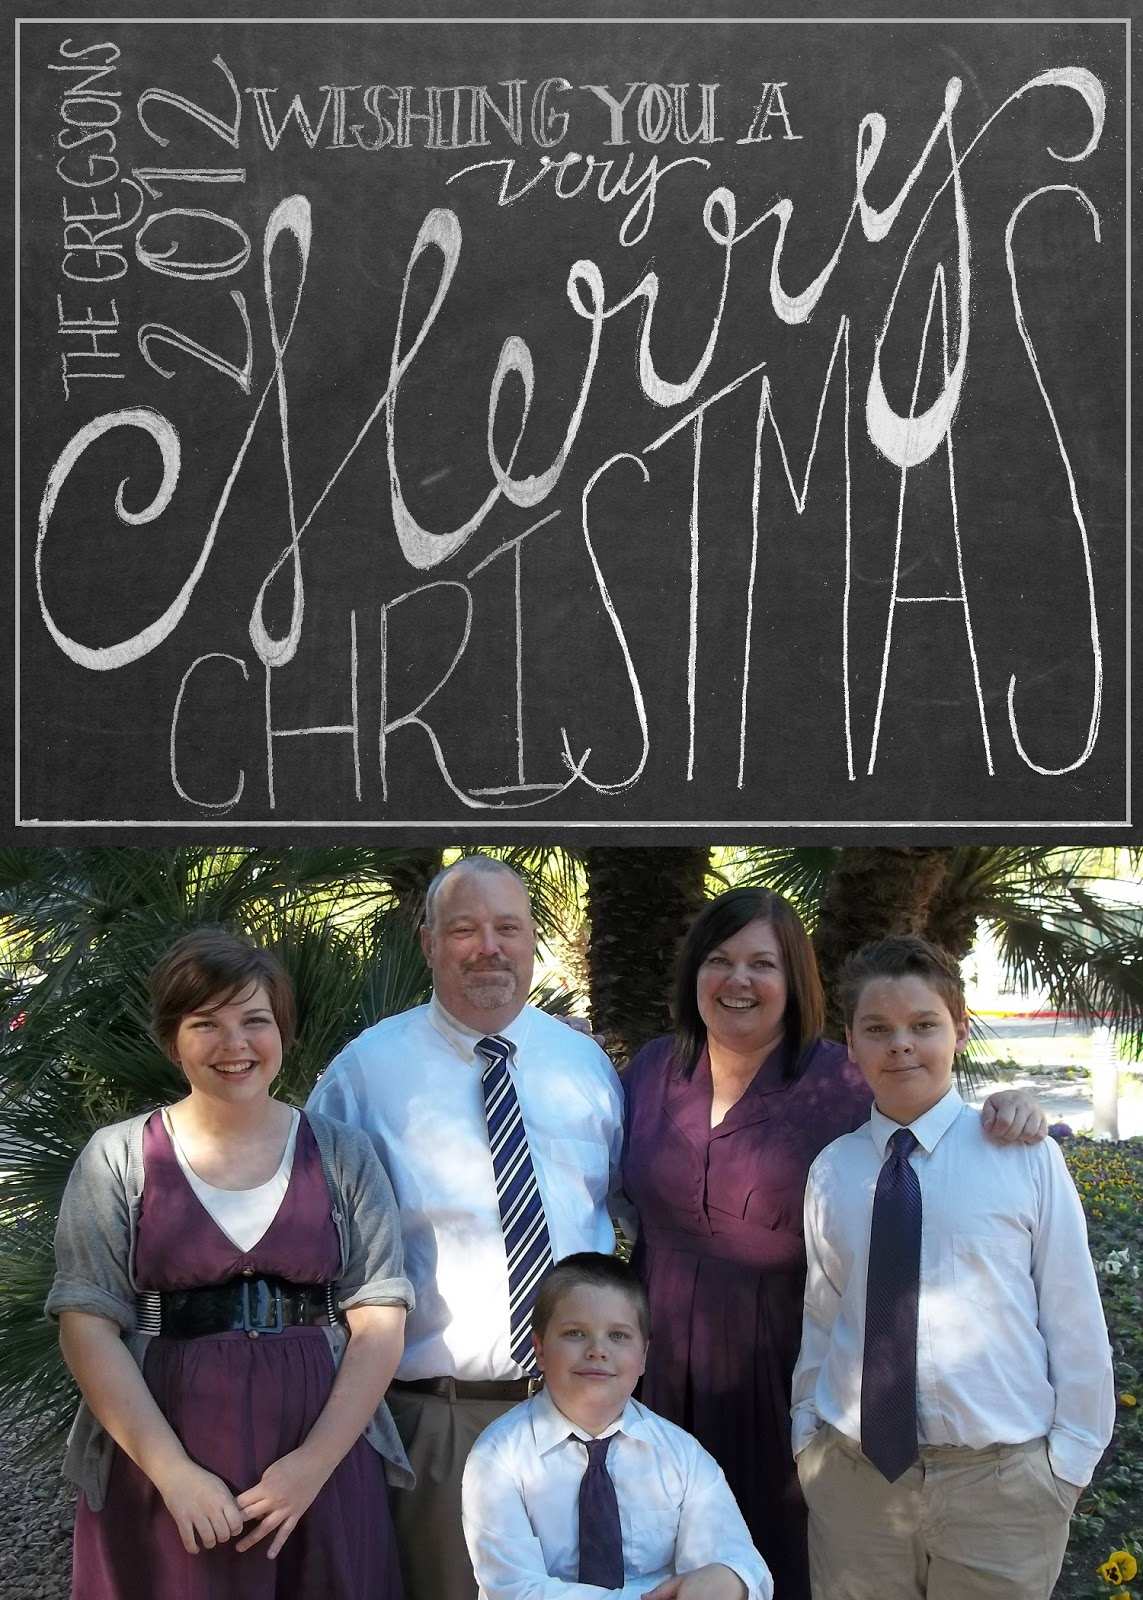 62-format-4x6-christmas-card-template-free-psd-file-by-4x6-christmas